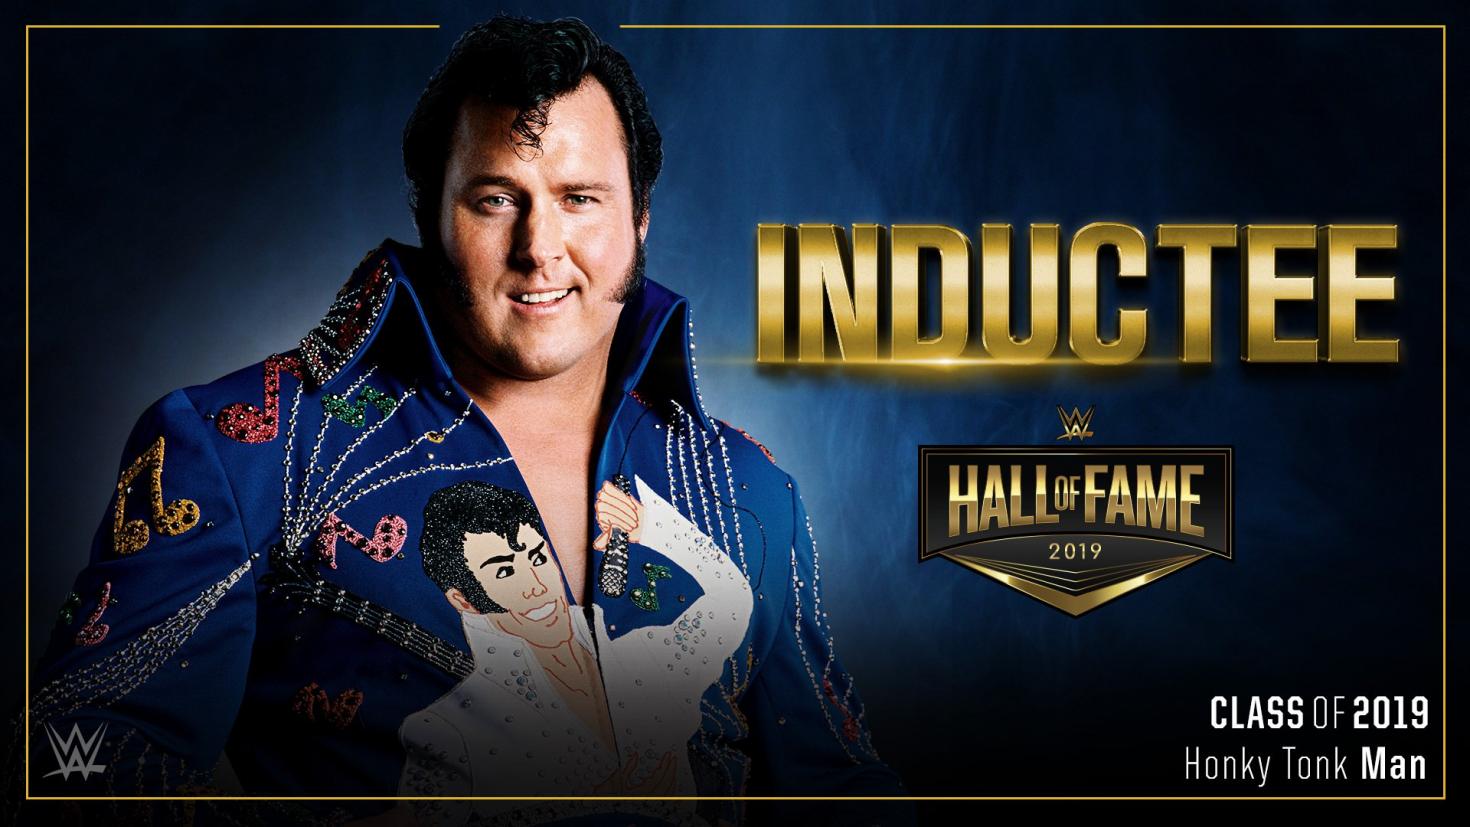 The Honky Tonk Man Will Be Inducted Into the WWE Hall of Fame TPWW